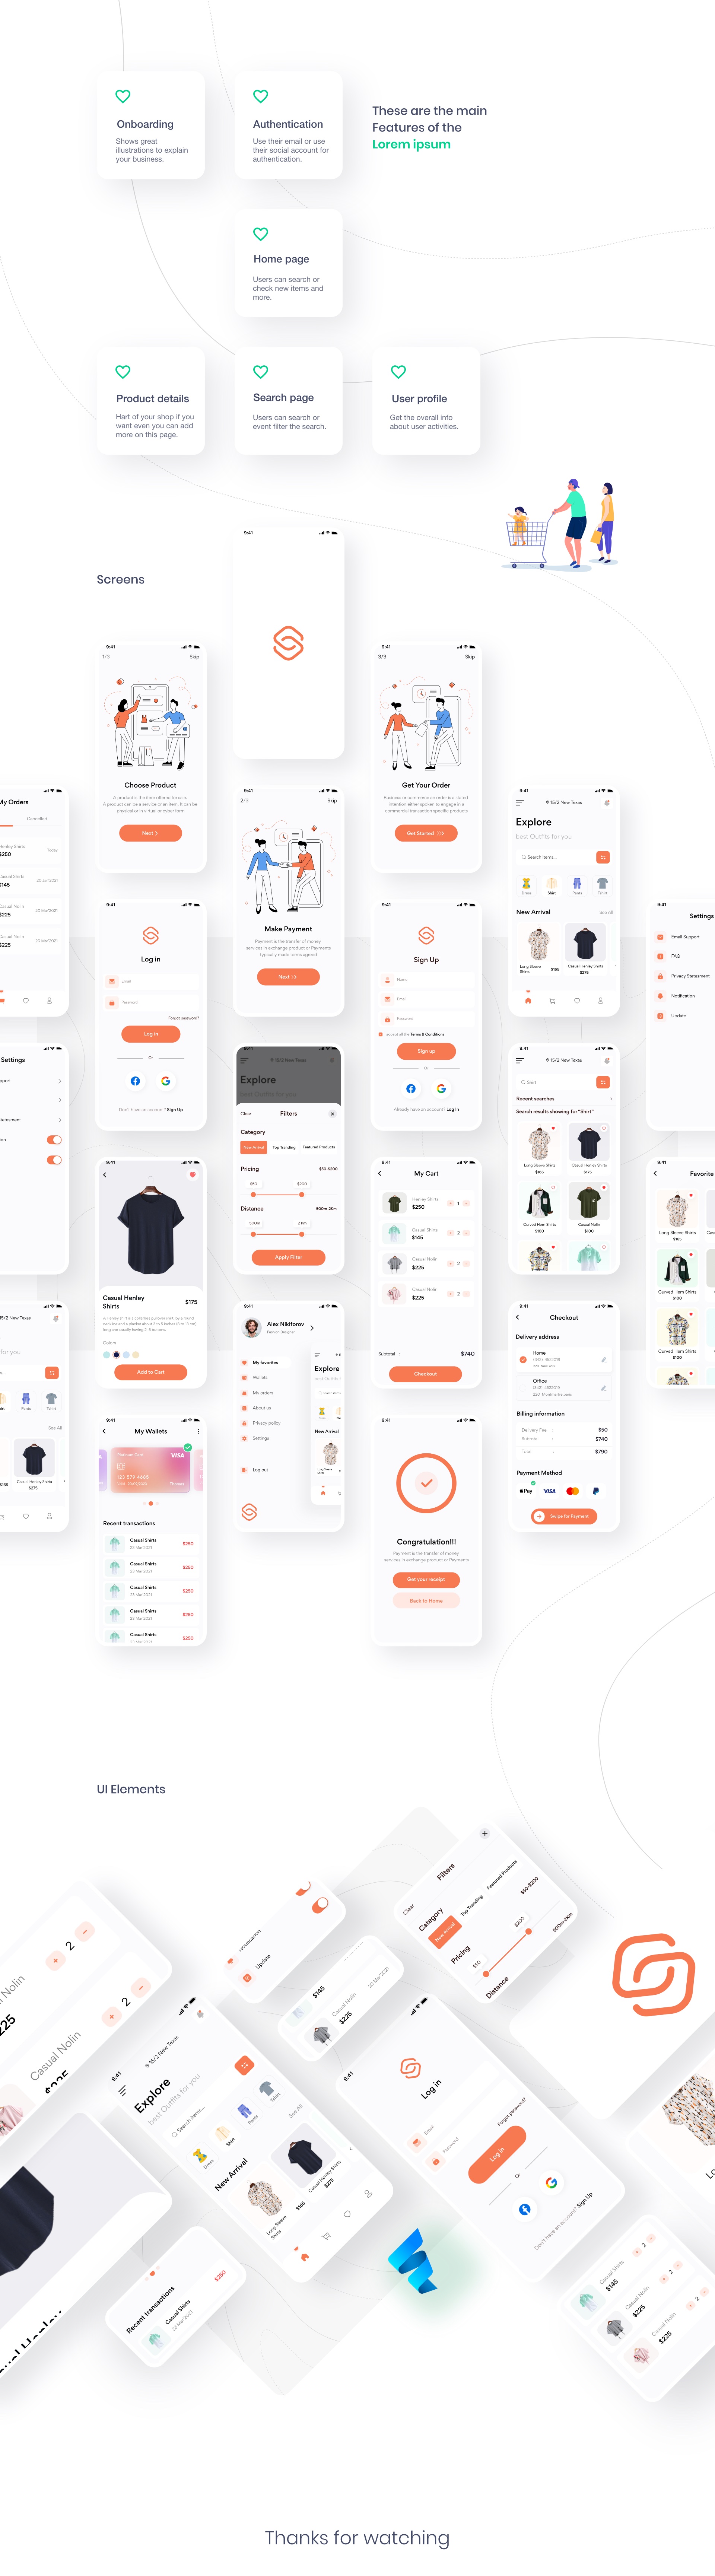 Flutter Shop UI Kit Comes With More Than 15 Screens